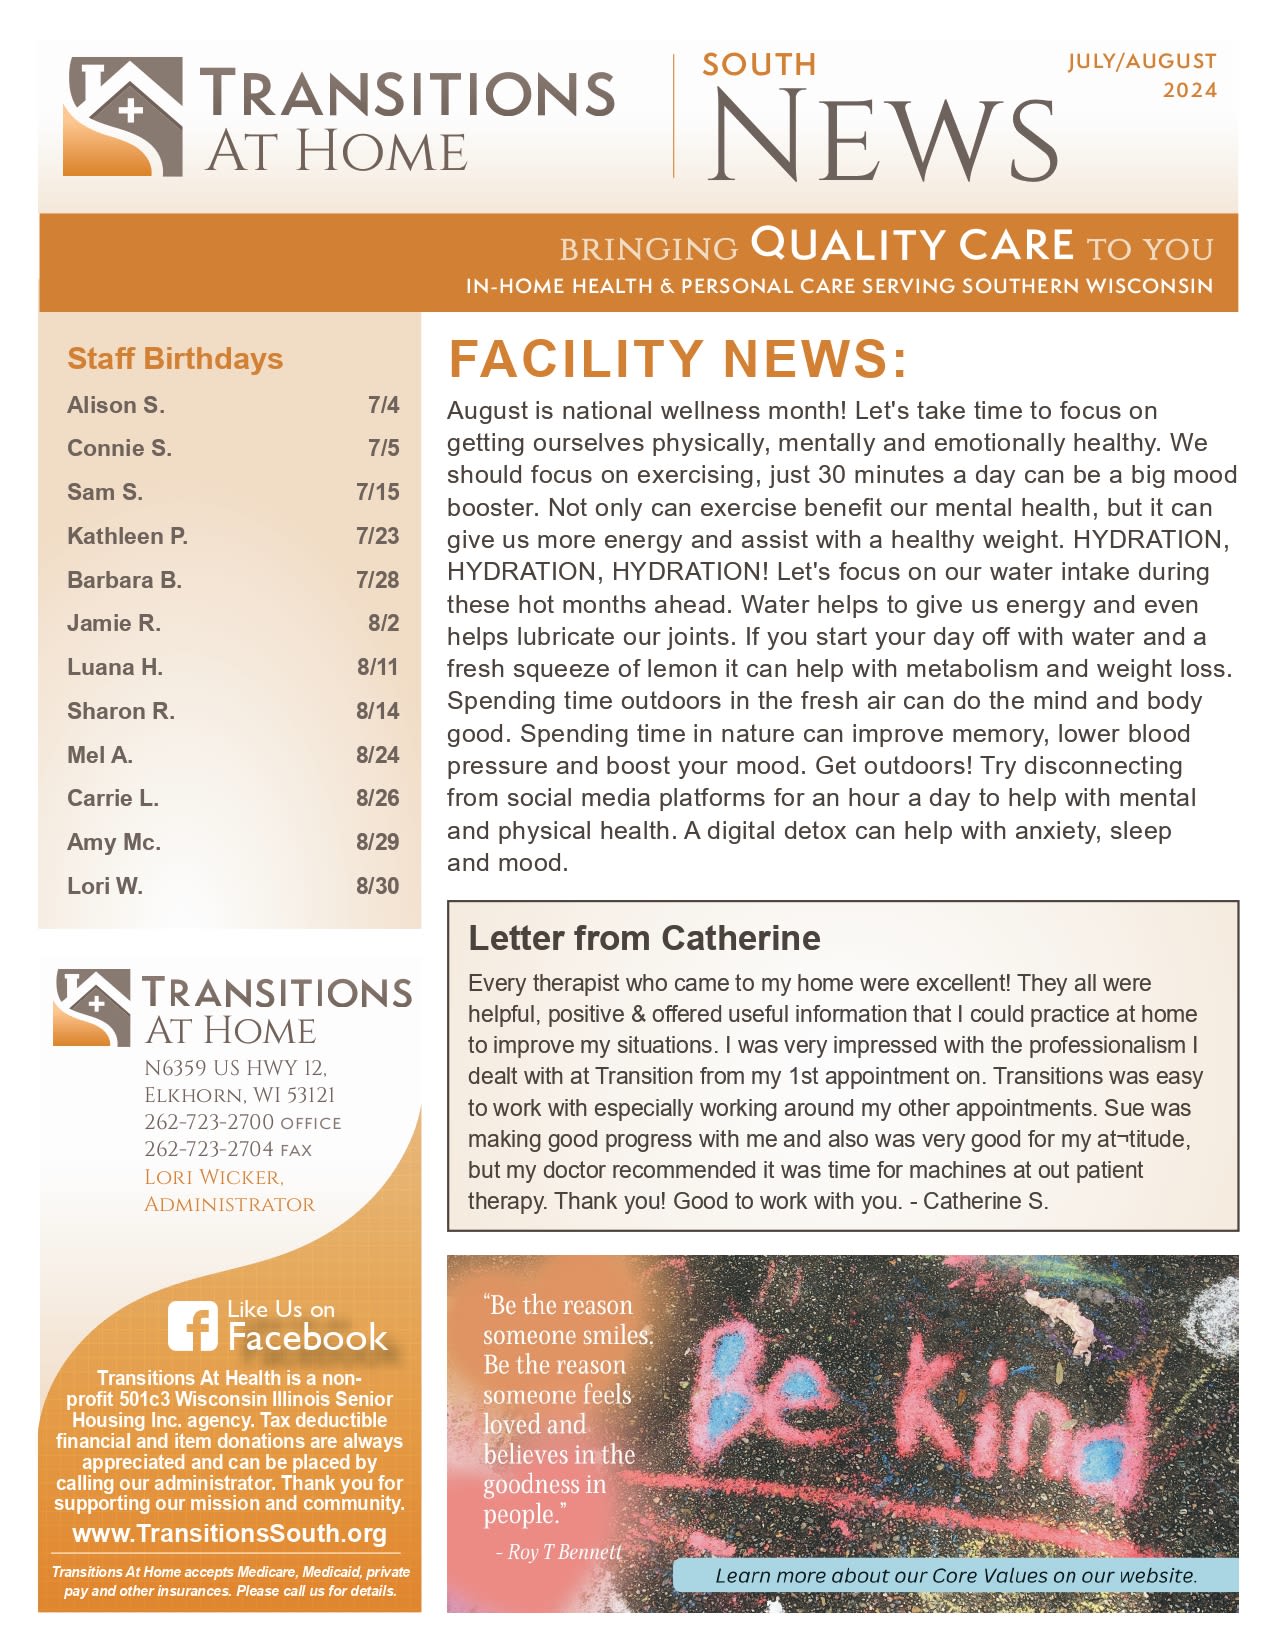 July 2024 Newsletter at Transitions At Home in Elkhorn, Wisconsin